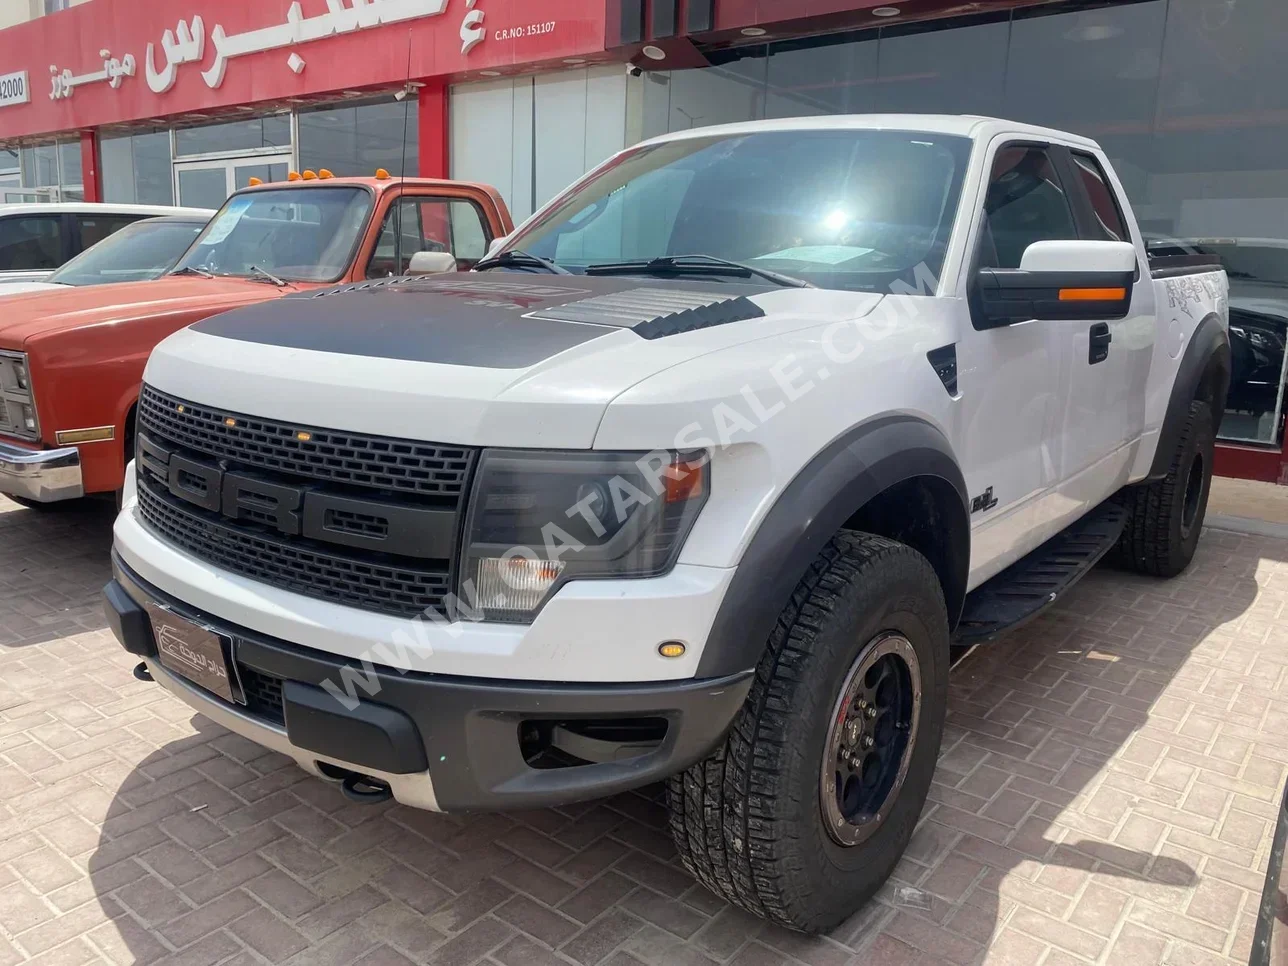 Ford  Raptor  SVT  2014  Automatic  128,000 Km  8 Cylinder  Four Wheel Drive (4WD)  Pick Up  White